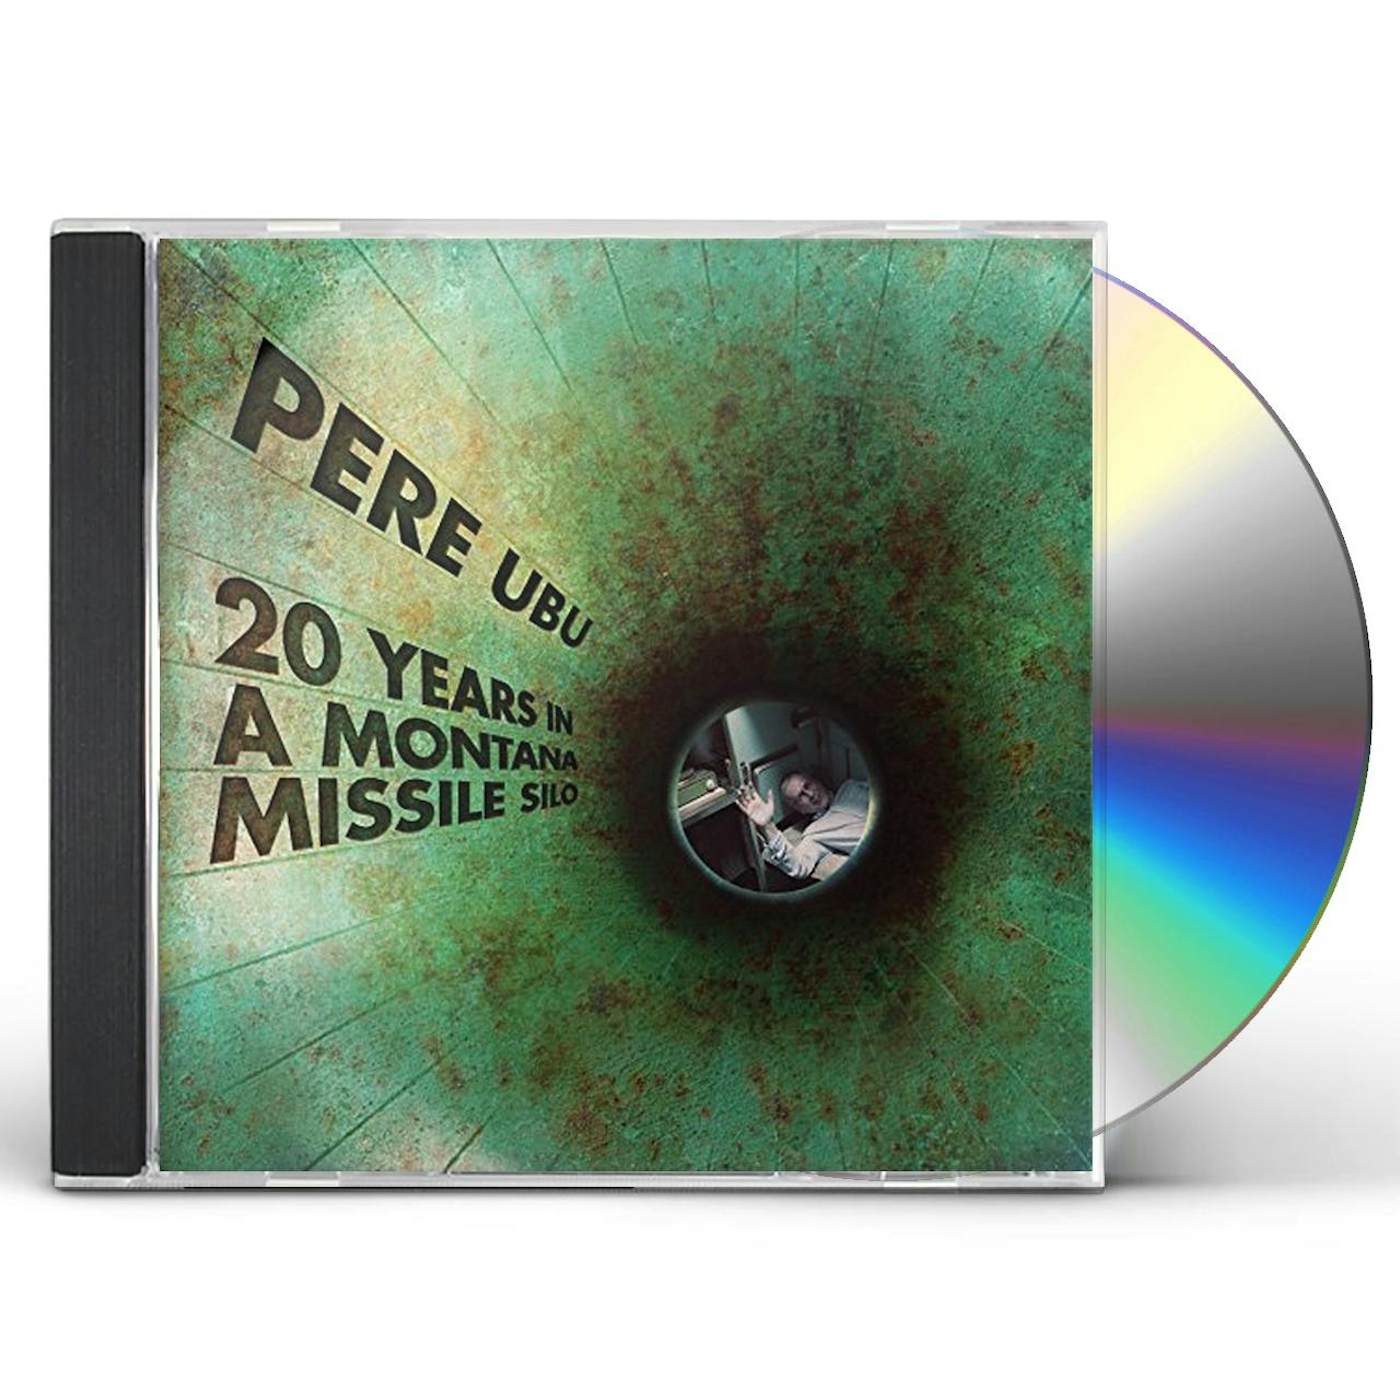 Pere Ubu 20 YEARS IN A MONTANA MISSILE SILO CD